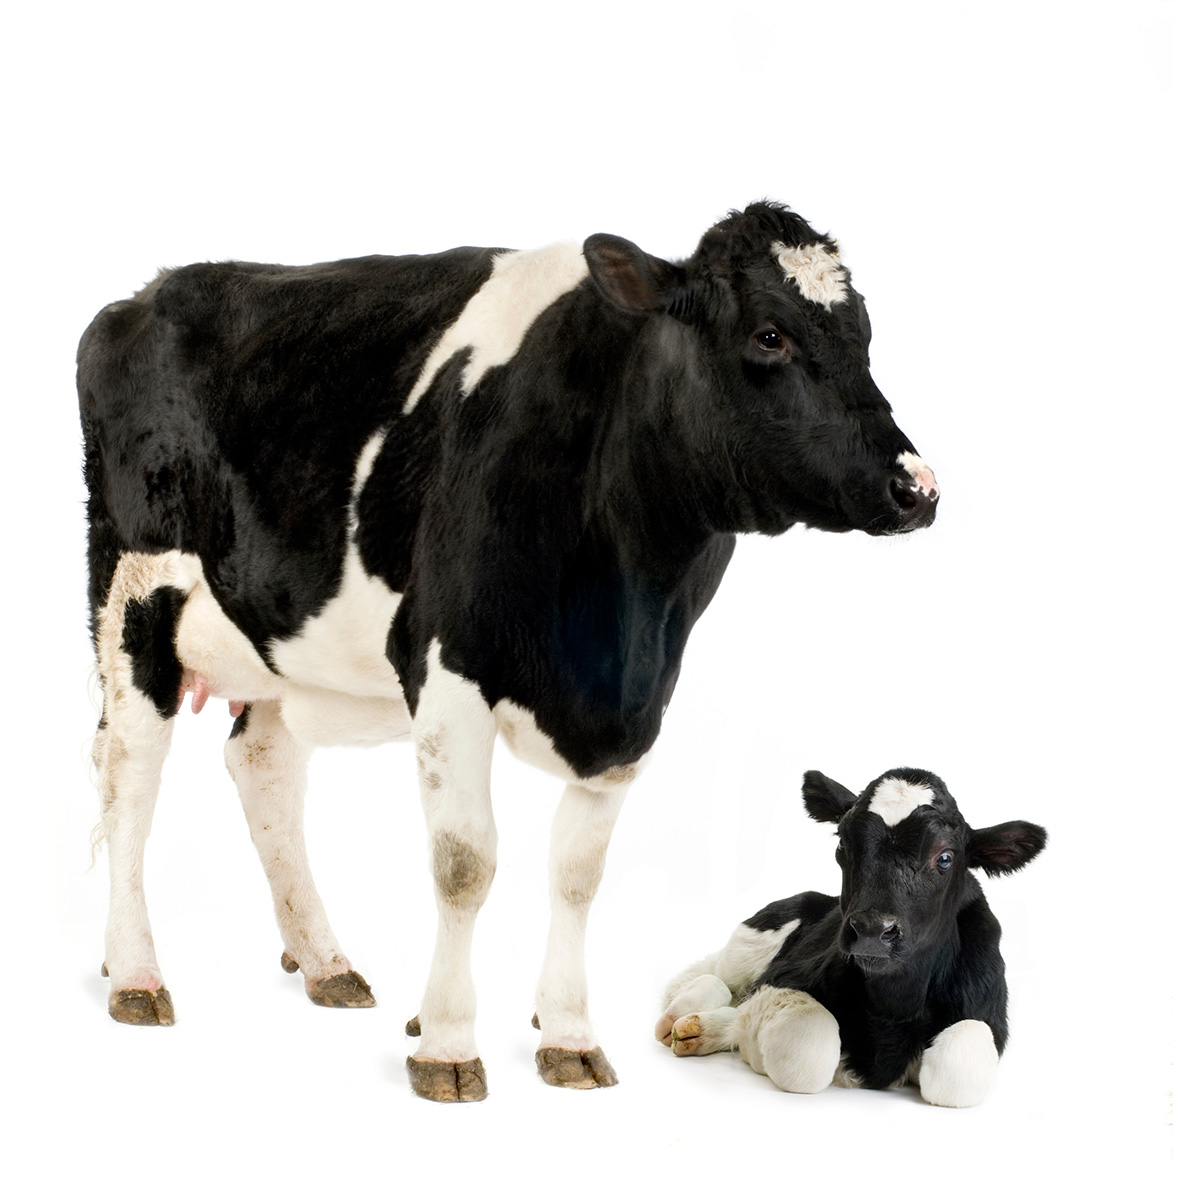 dairy cow and calf